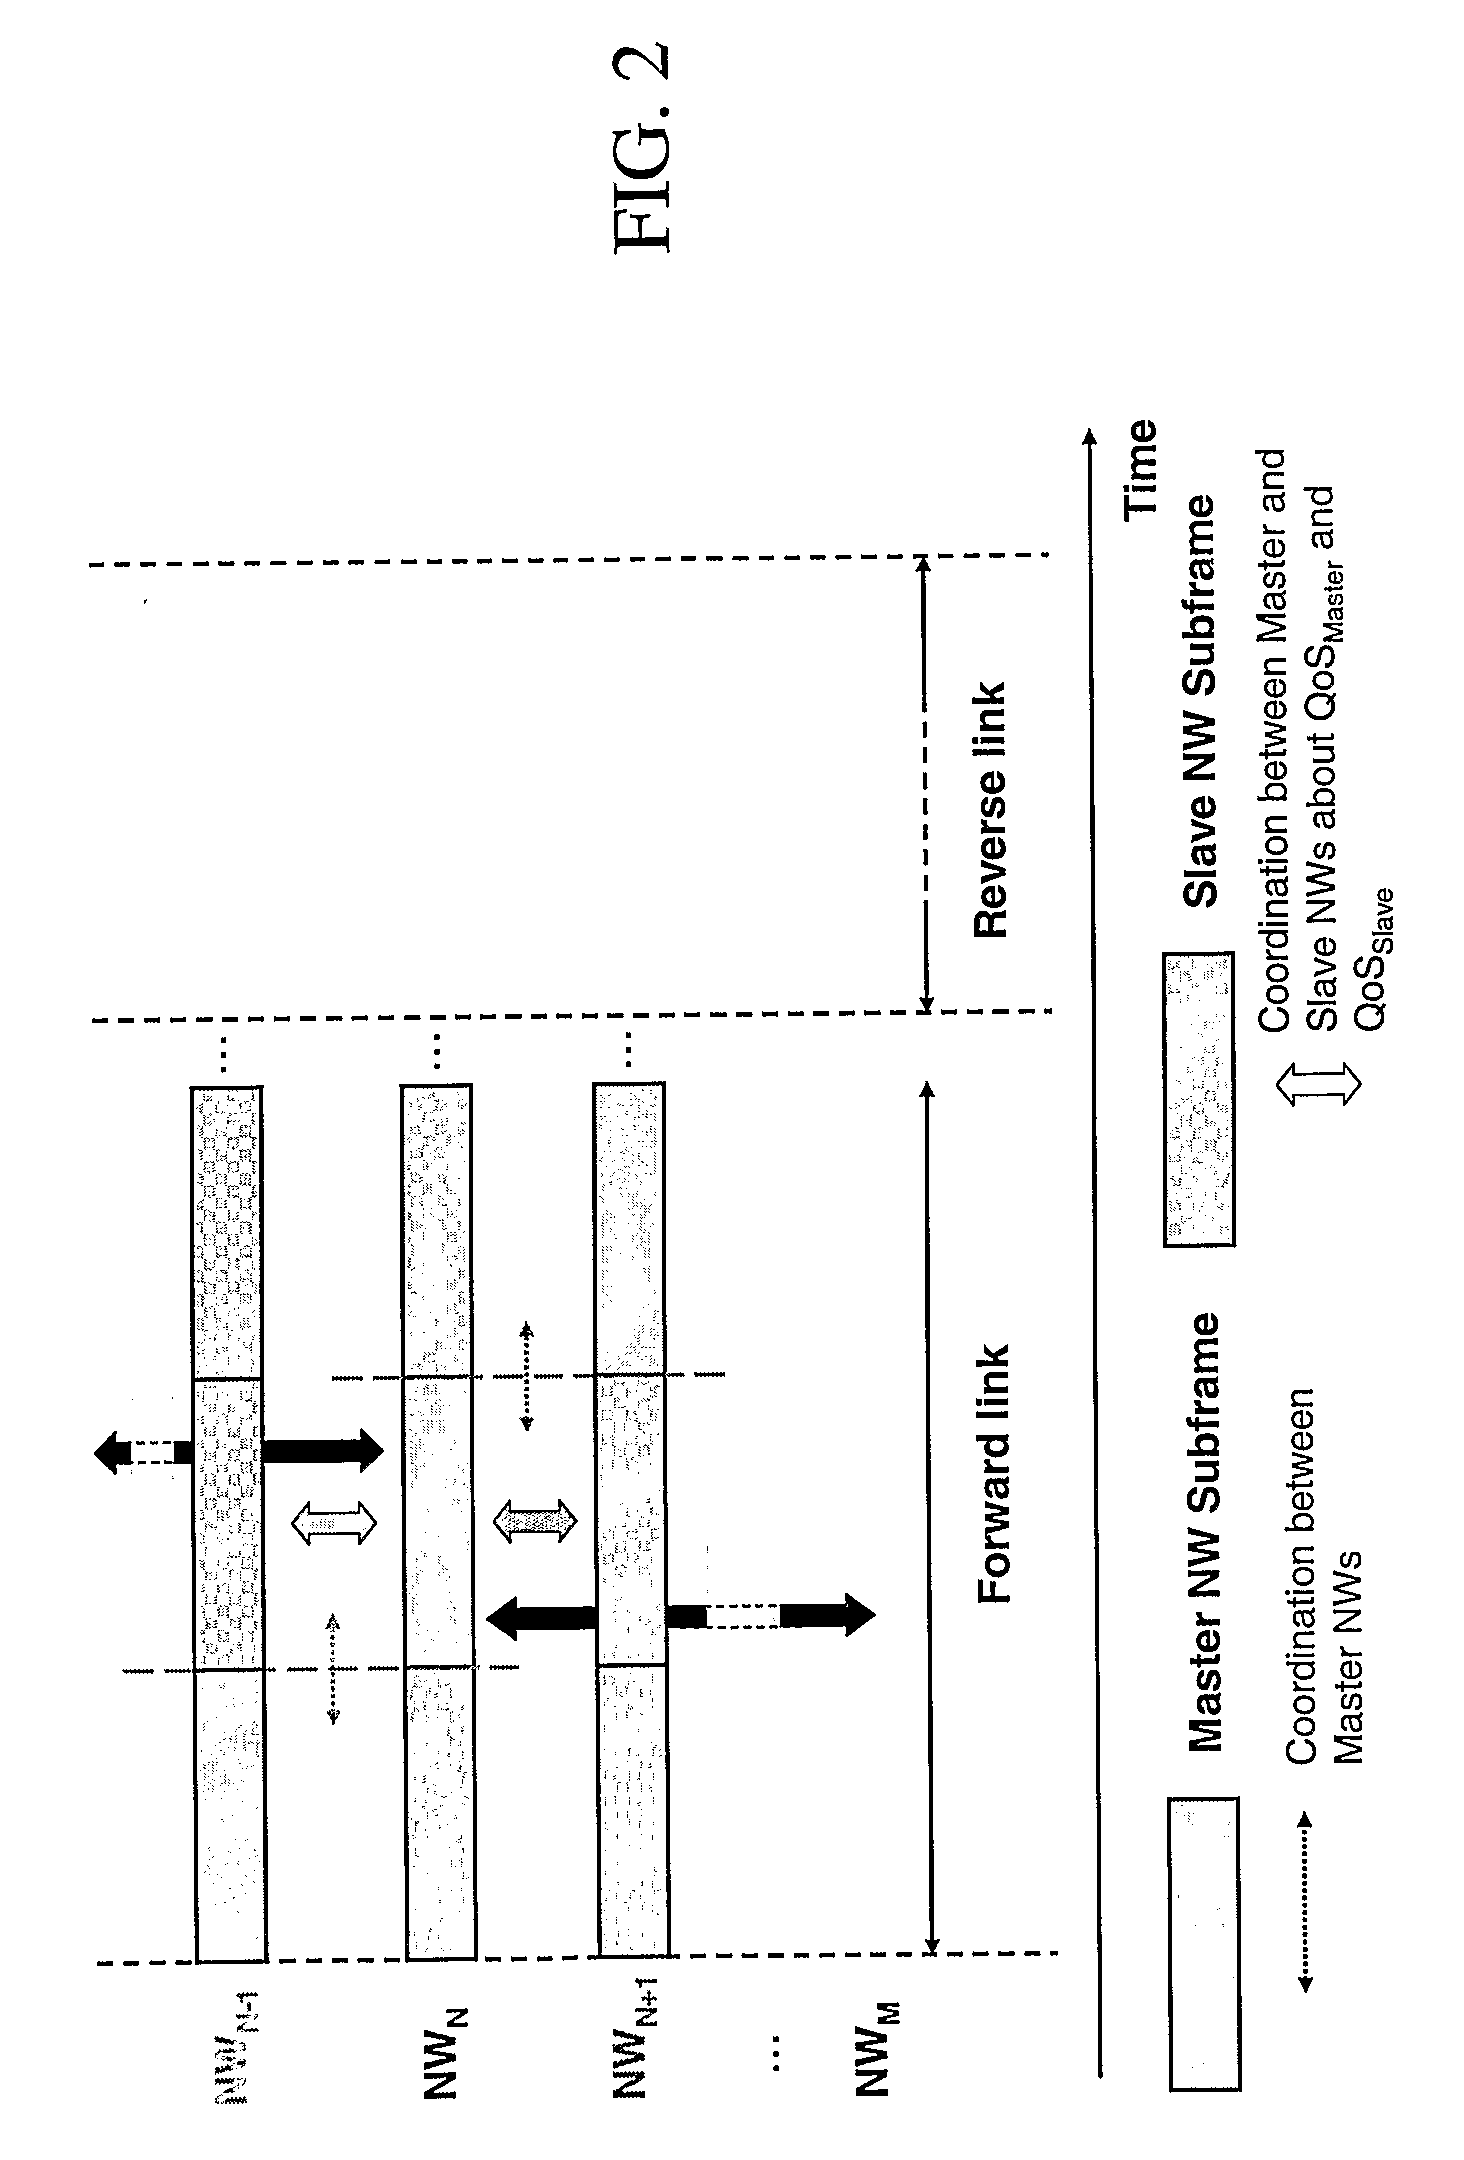 Apparatus and Method For Resource Sharing Between a Plurality of Communication Networks